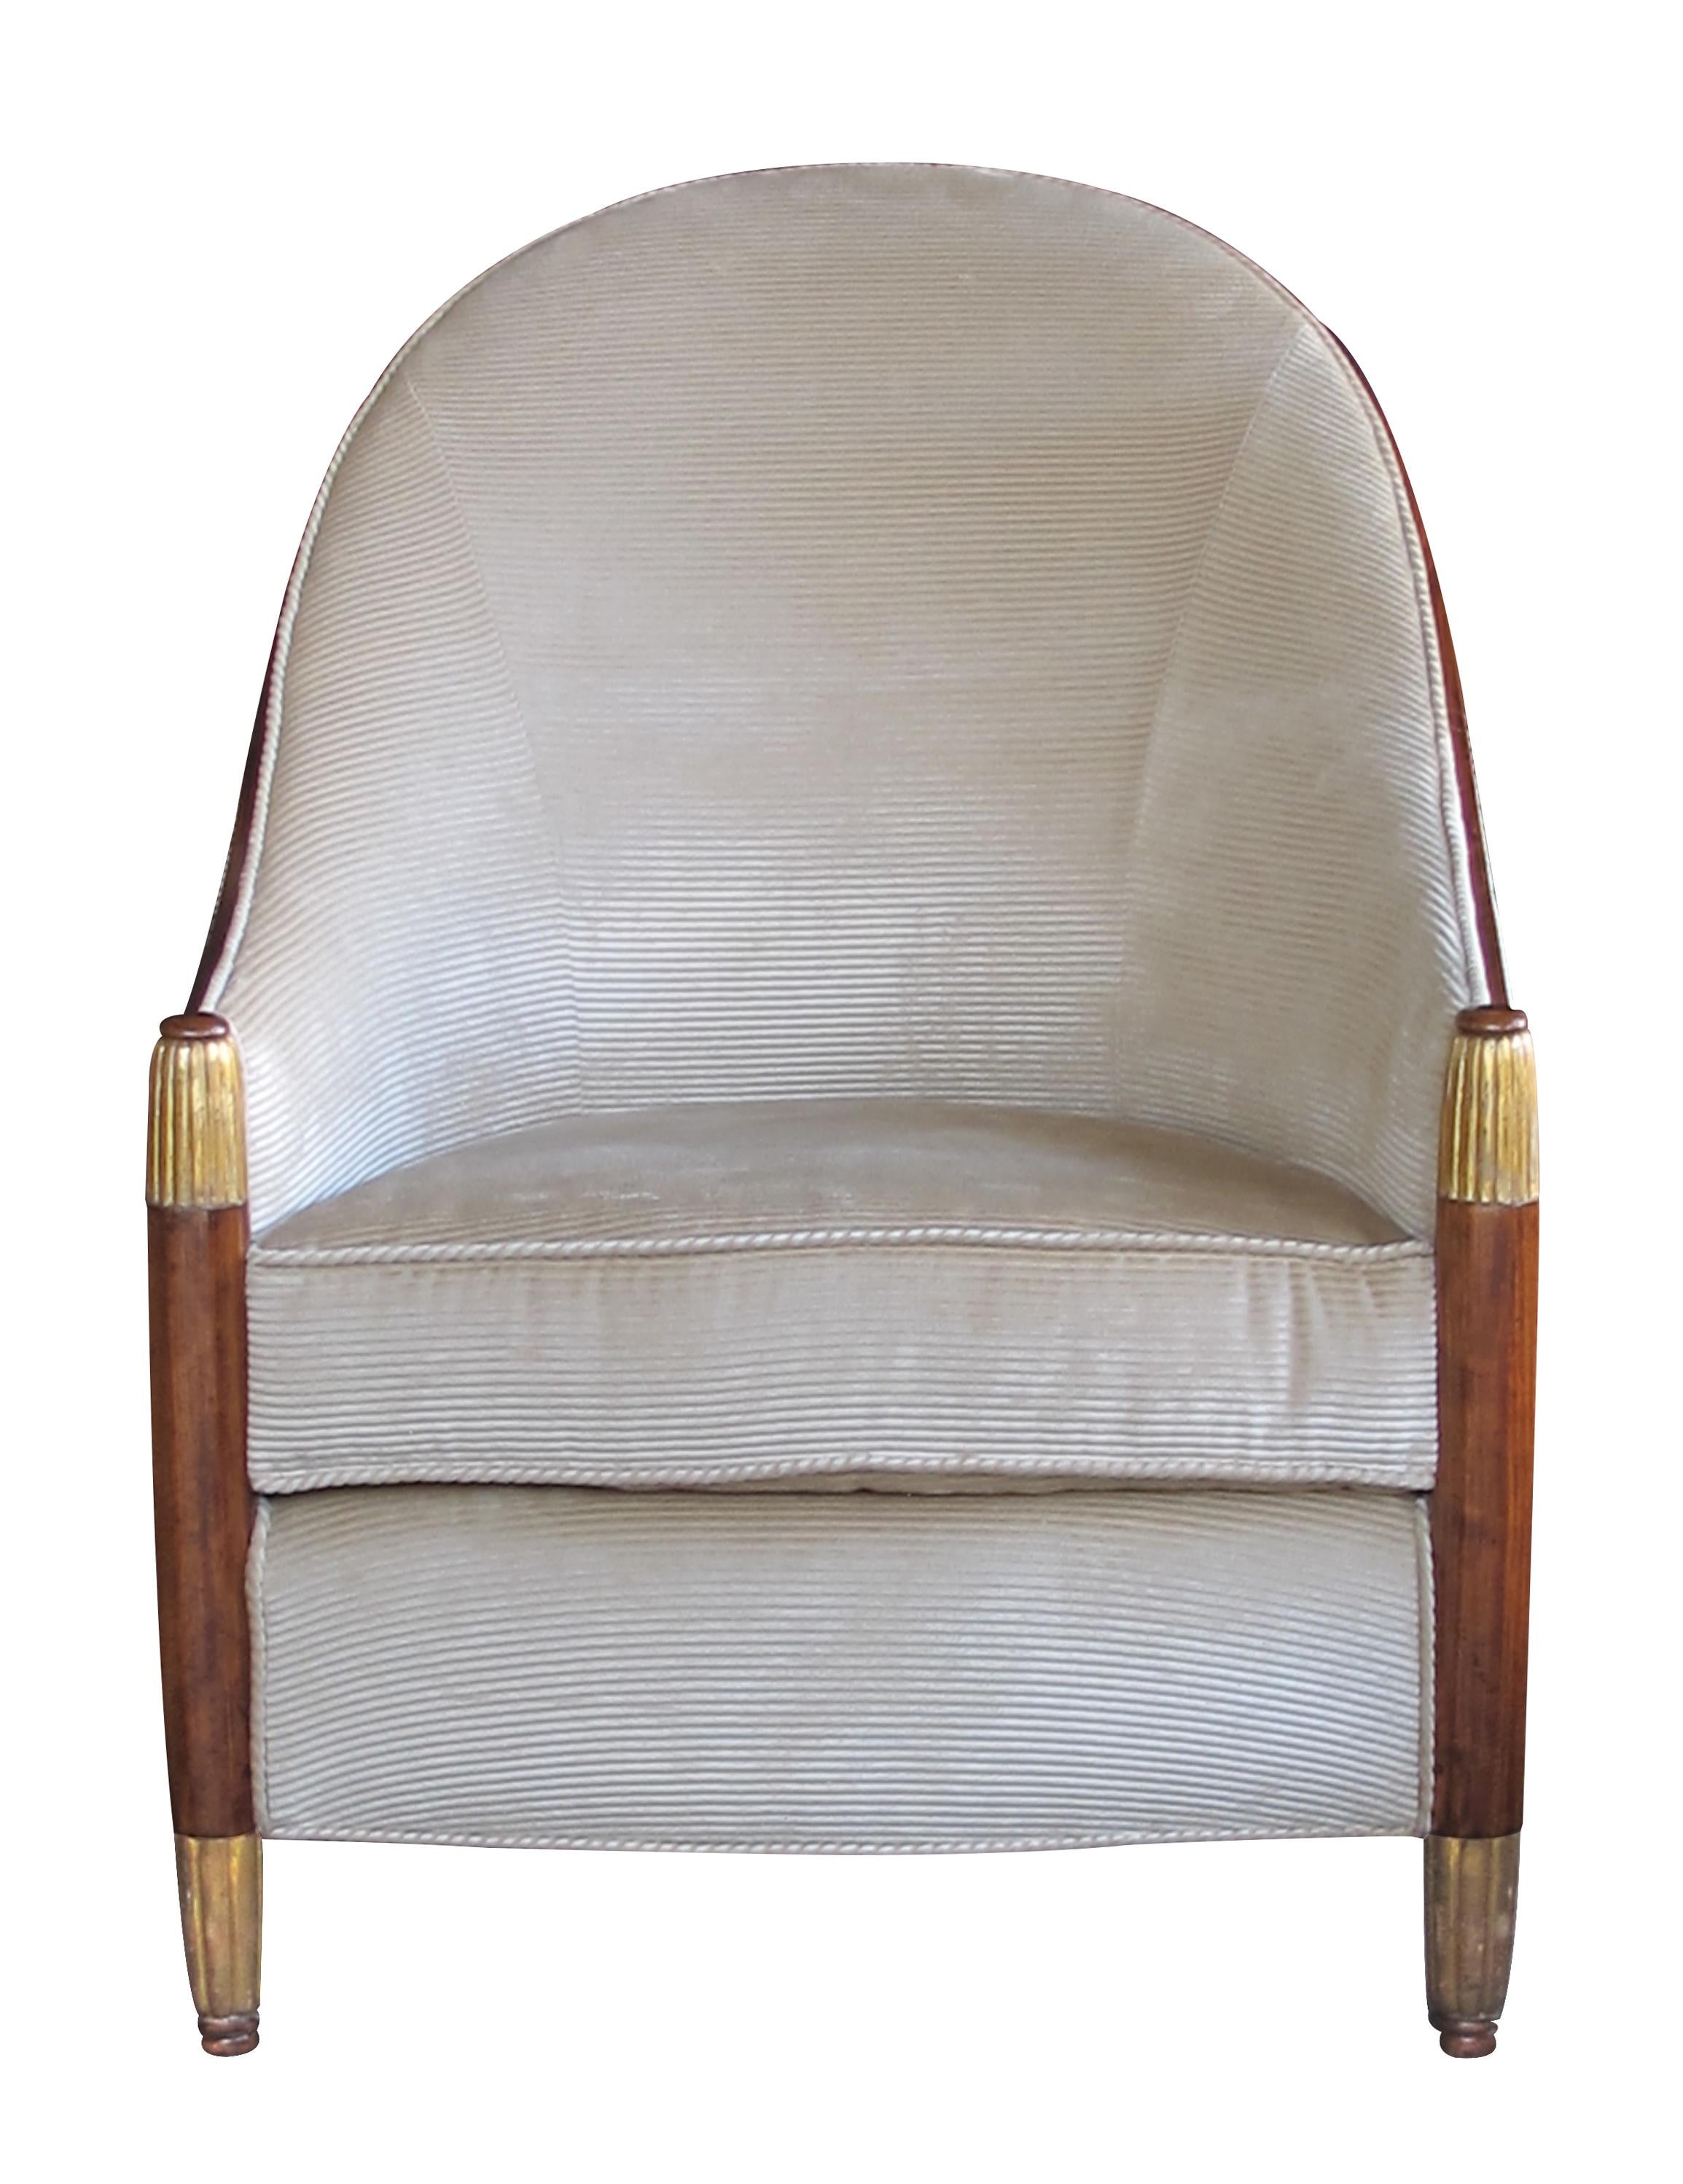 Art Deco at its chicest; the high arching back sweeps down to faceted supports with reeded gilt caps and feet.